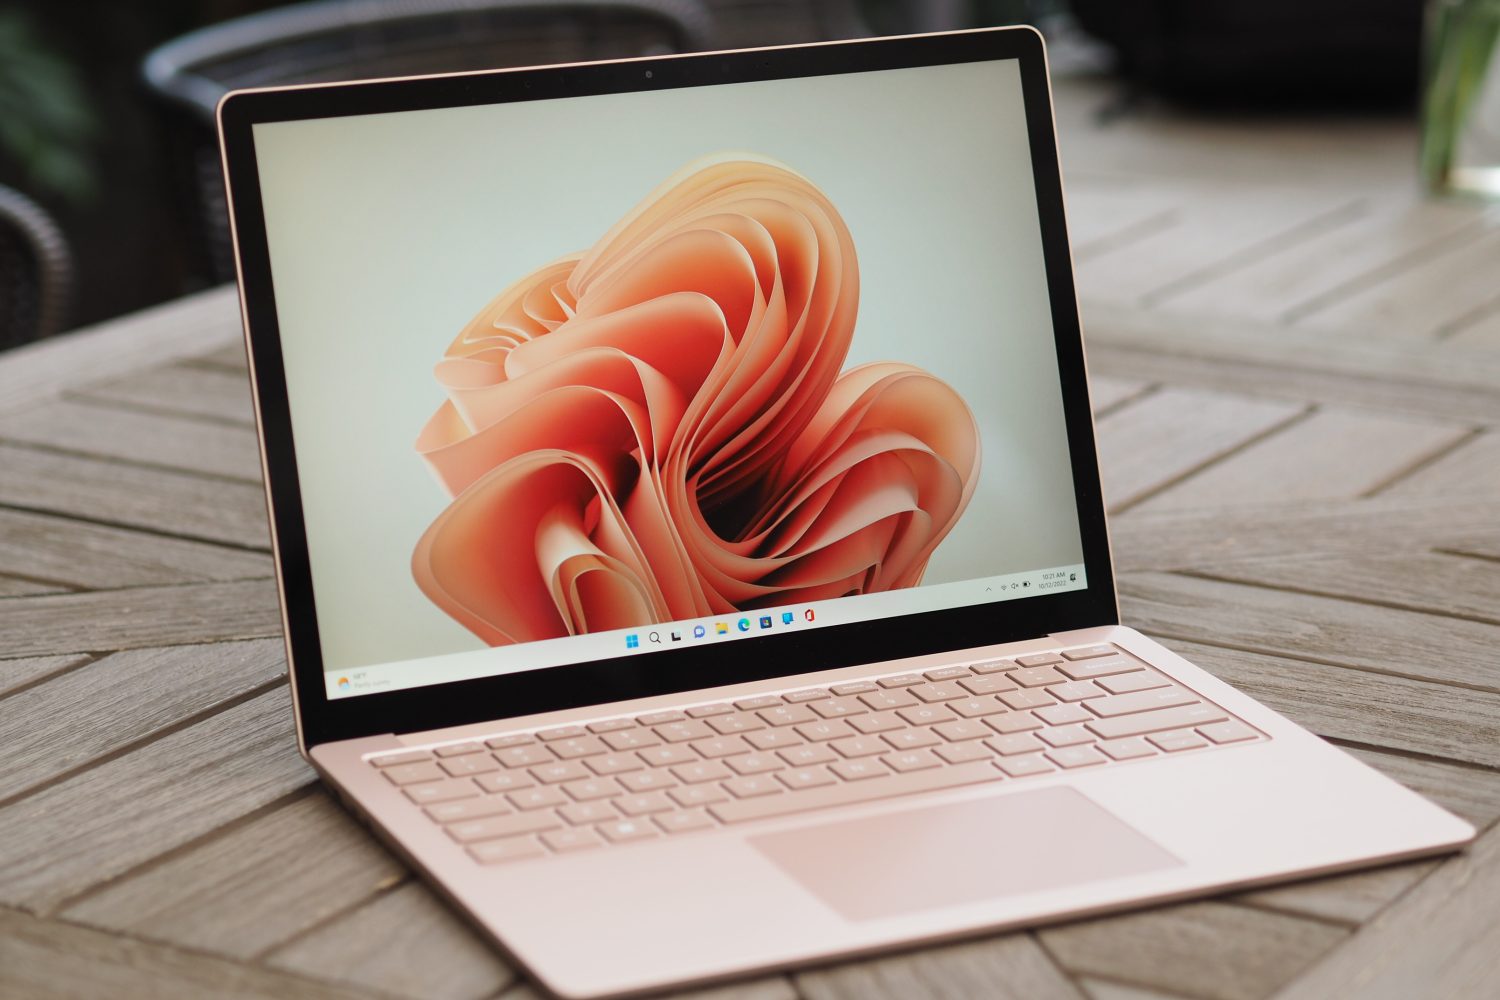 Microsoft Surface Laptop 5 just got a huge price cut for
Black Friday